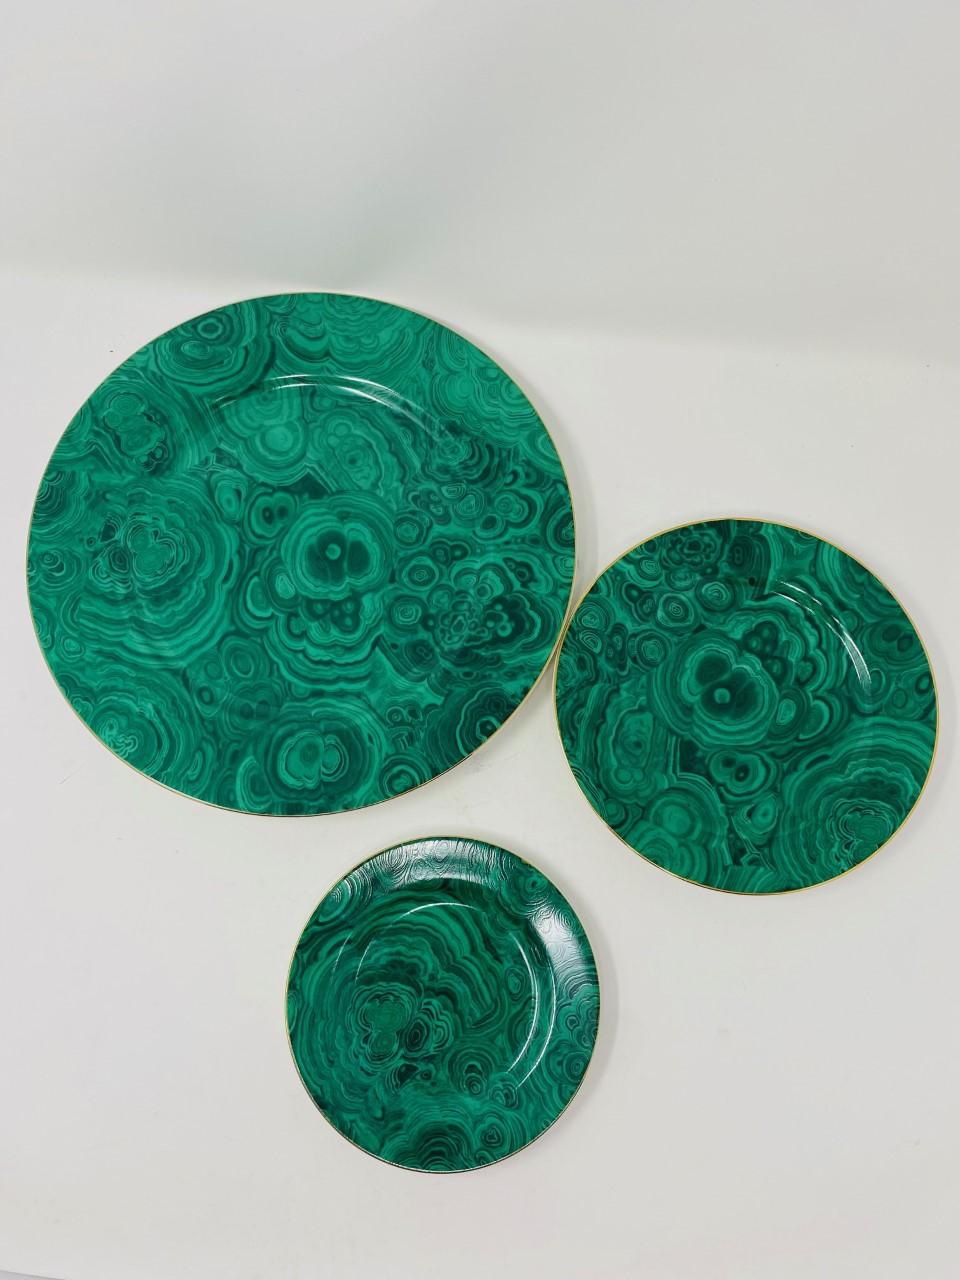 Vintage 1970s Neiman Marcus Malachite Porcelain Plates 'Set of 10' In Good Condition For Sale In San Diego, CA